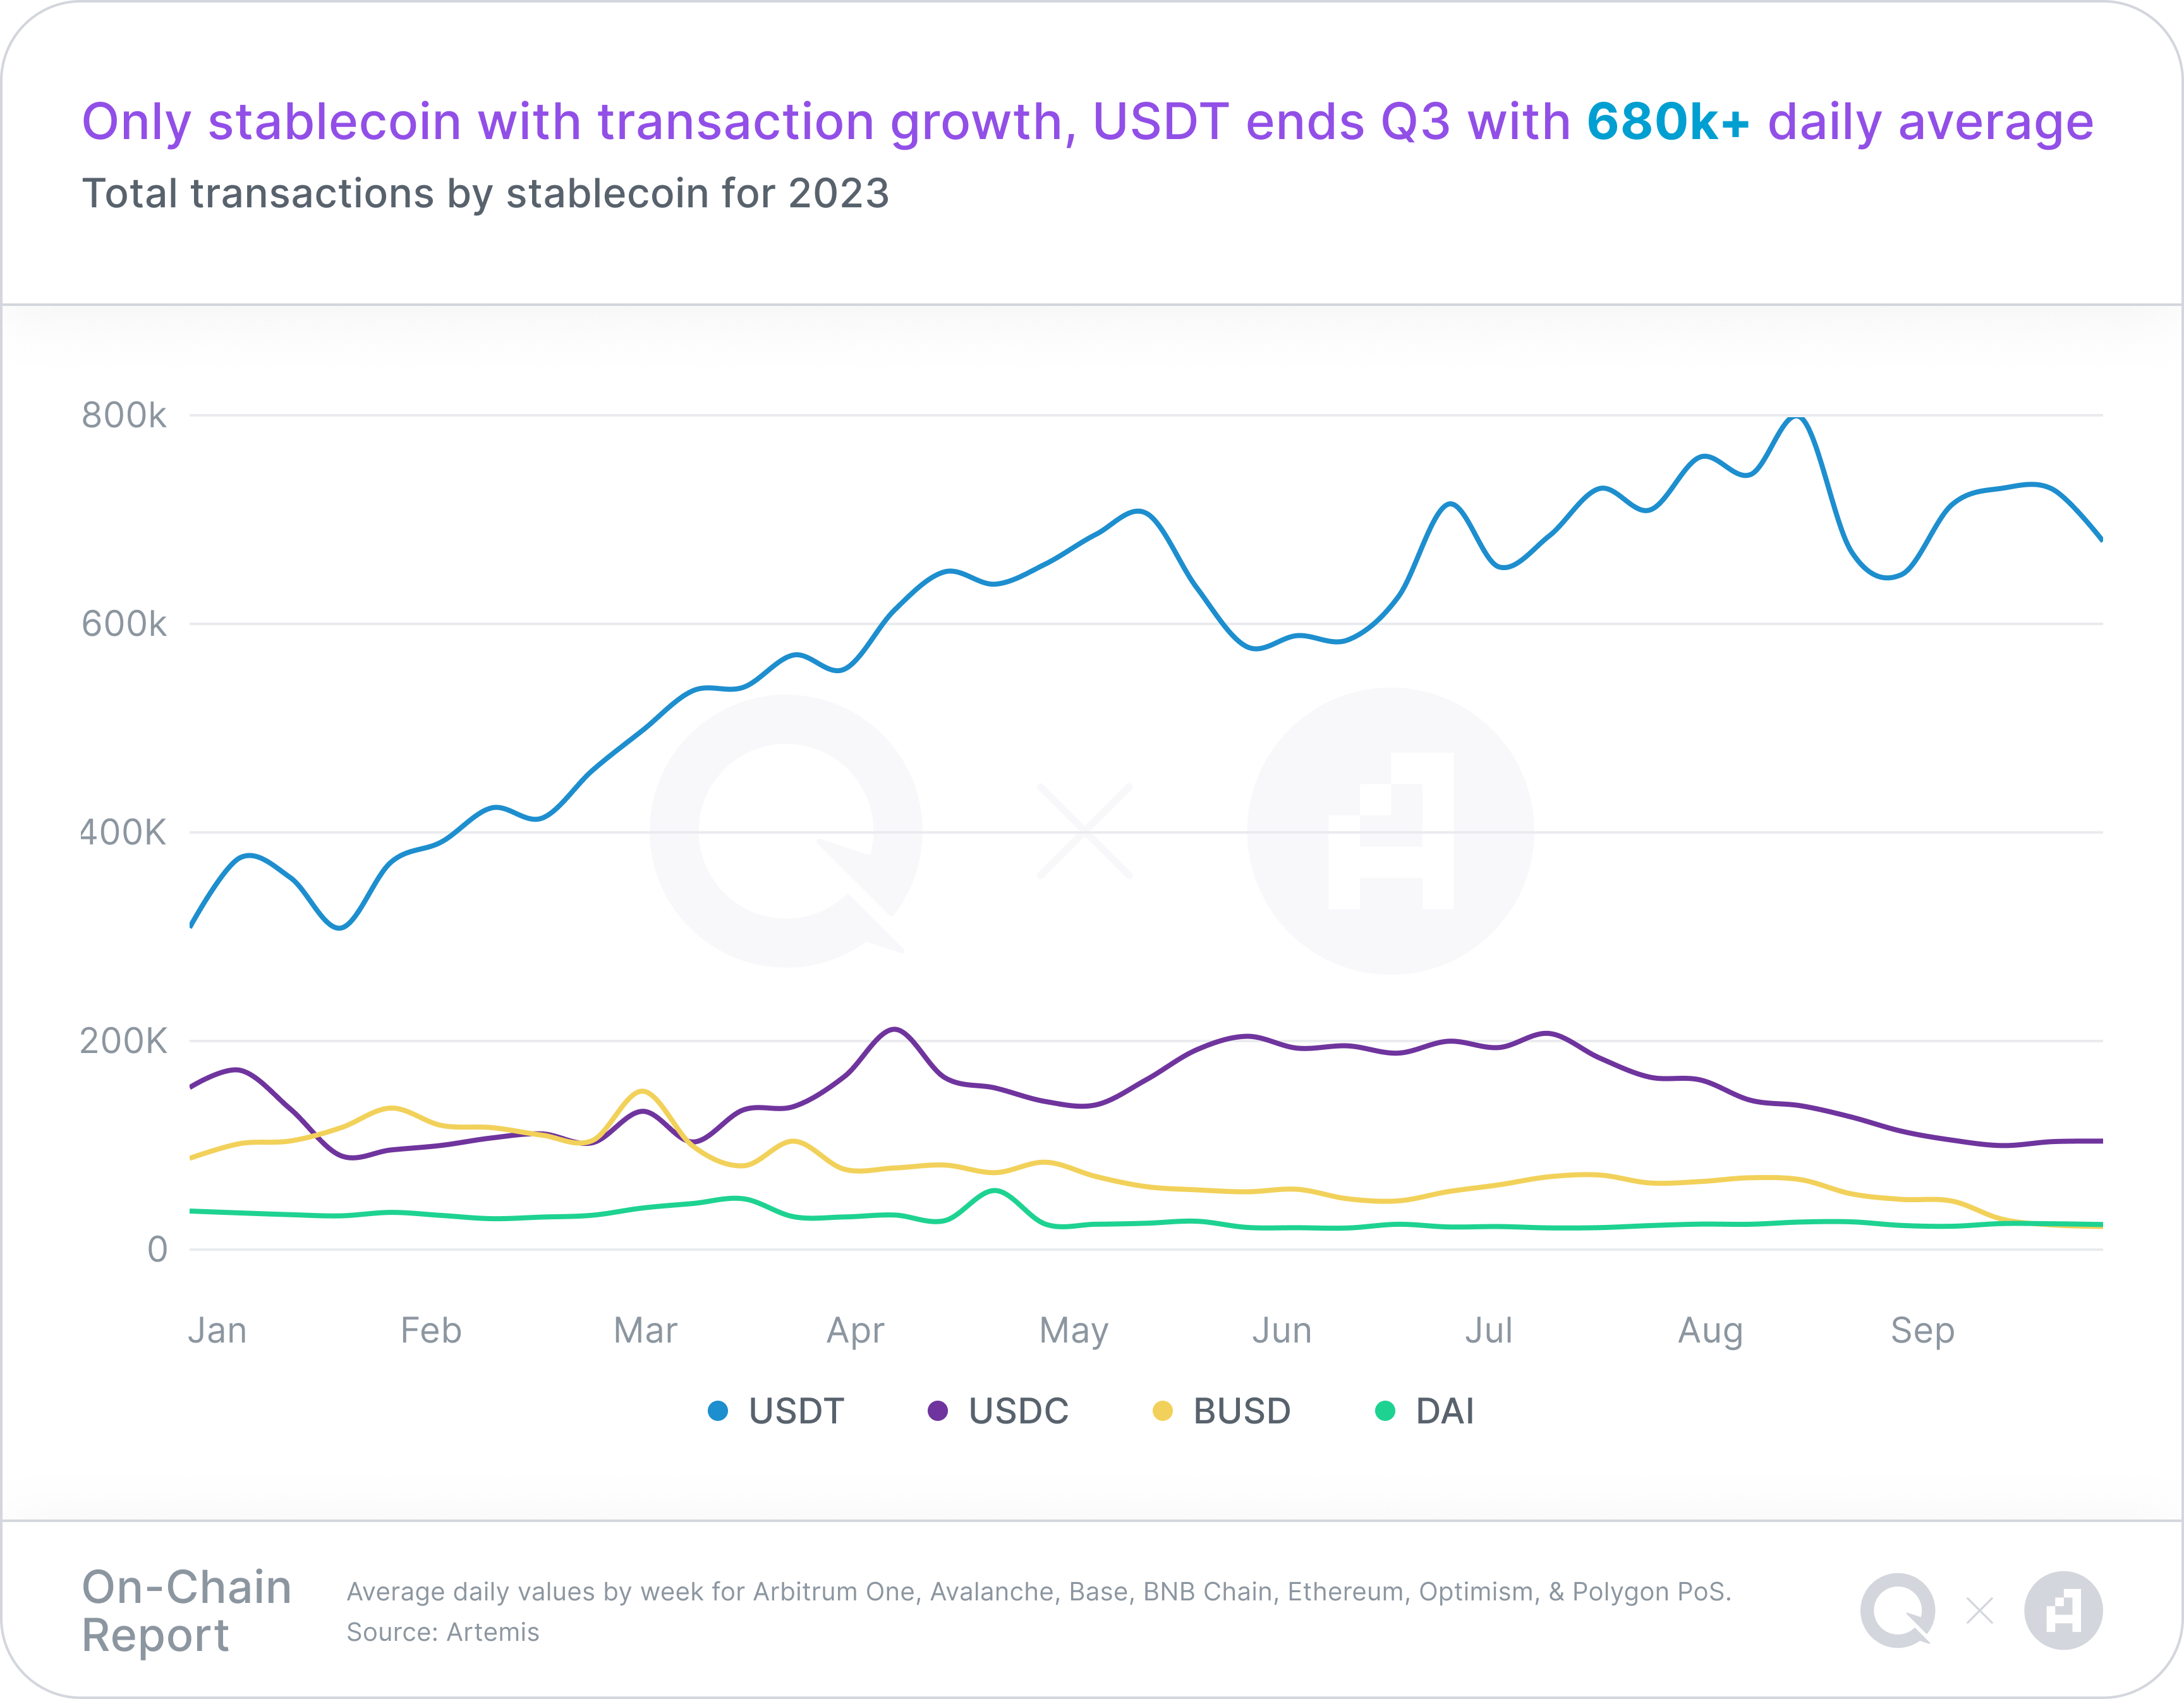 A chart representing total transactions by stablecoin for 2023, with a takeaway headline of "Only stablecoin with transaction growth, USDT ends Q3 with 680k+ daily average"